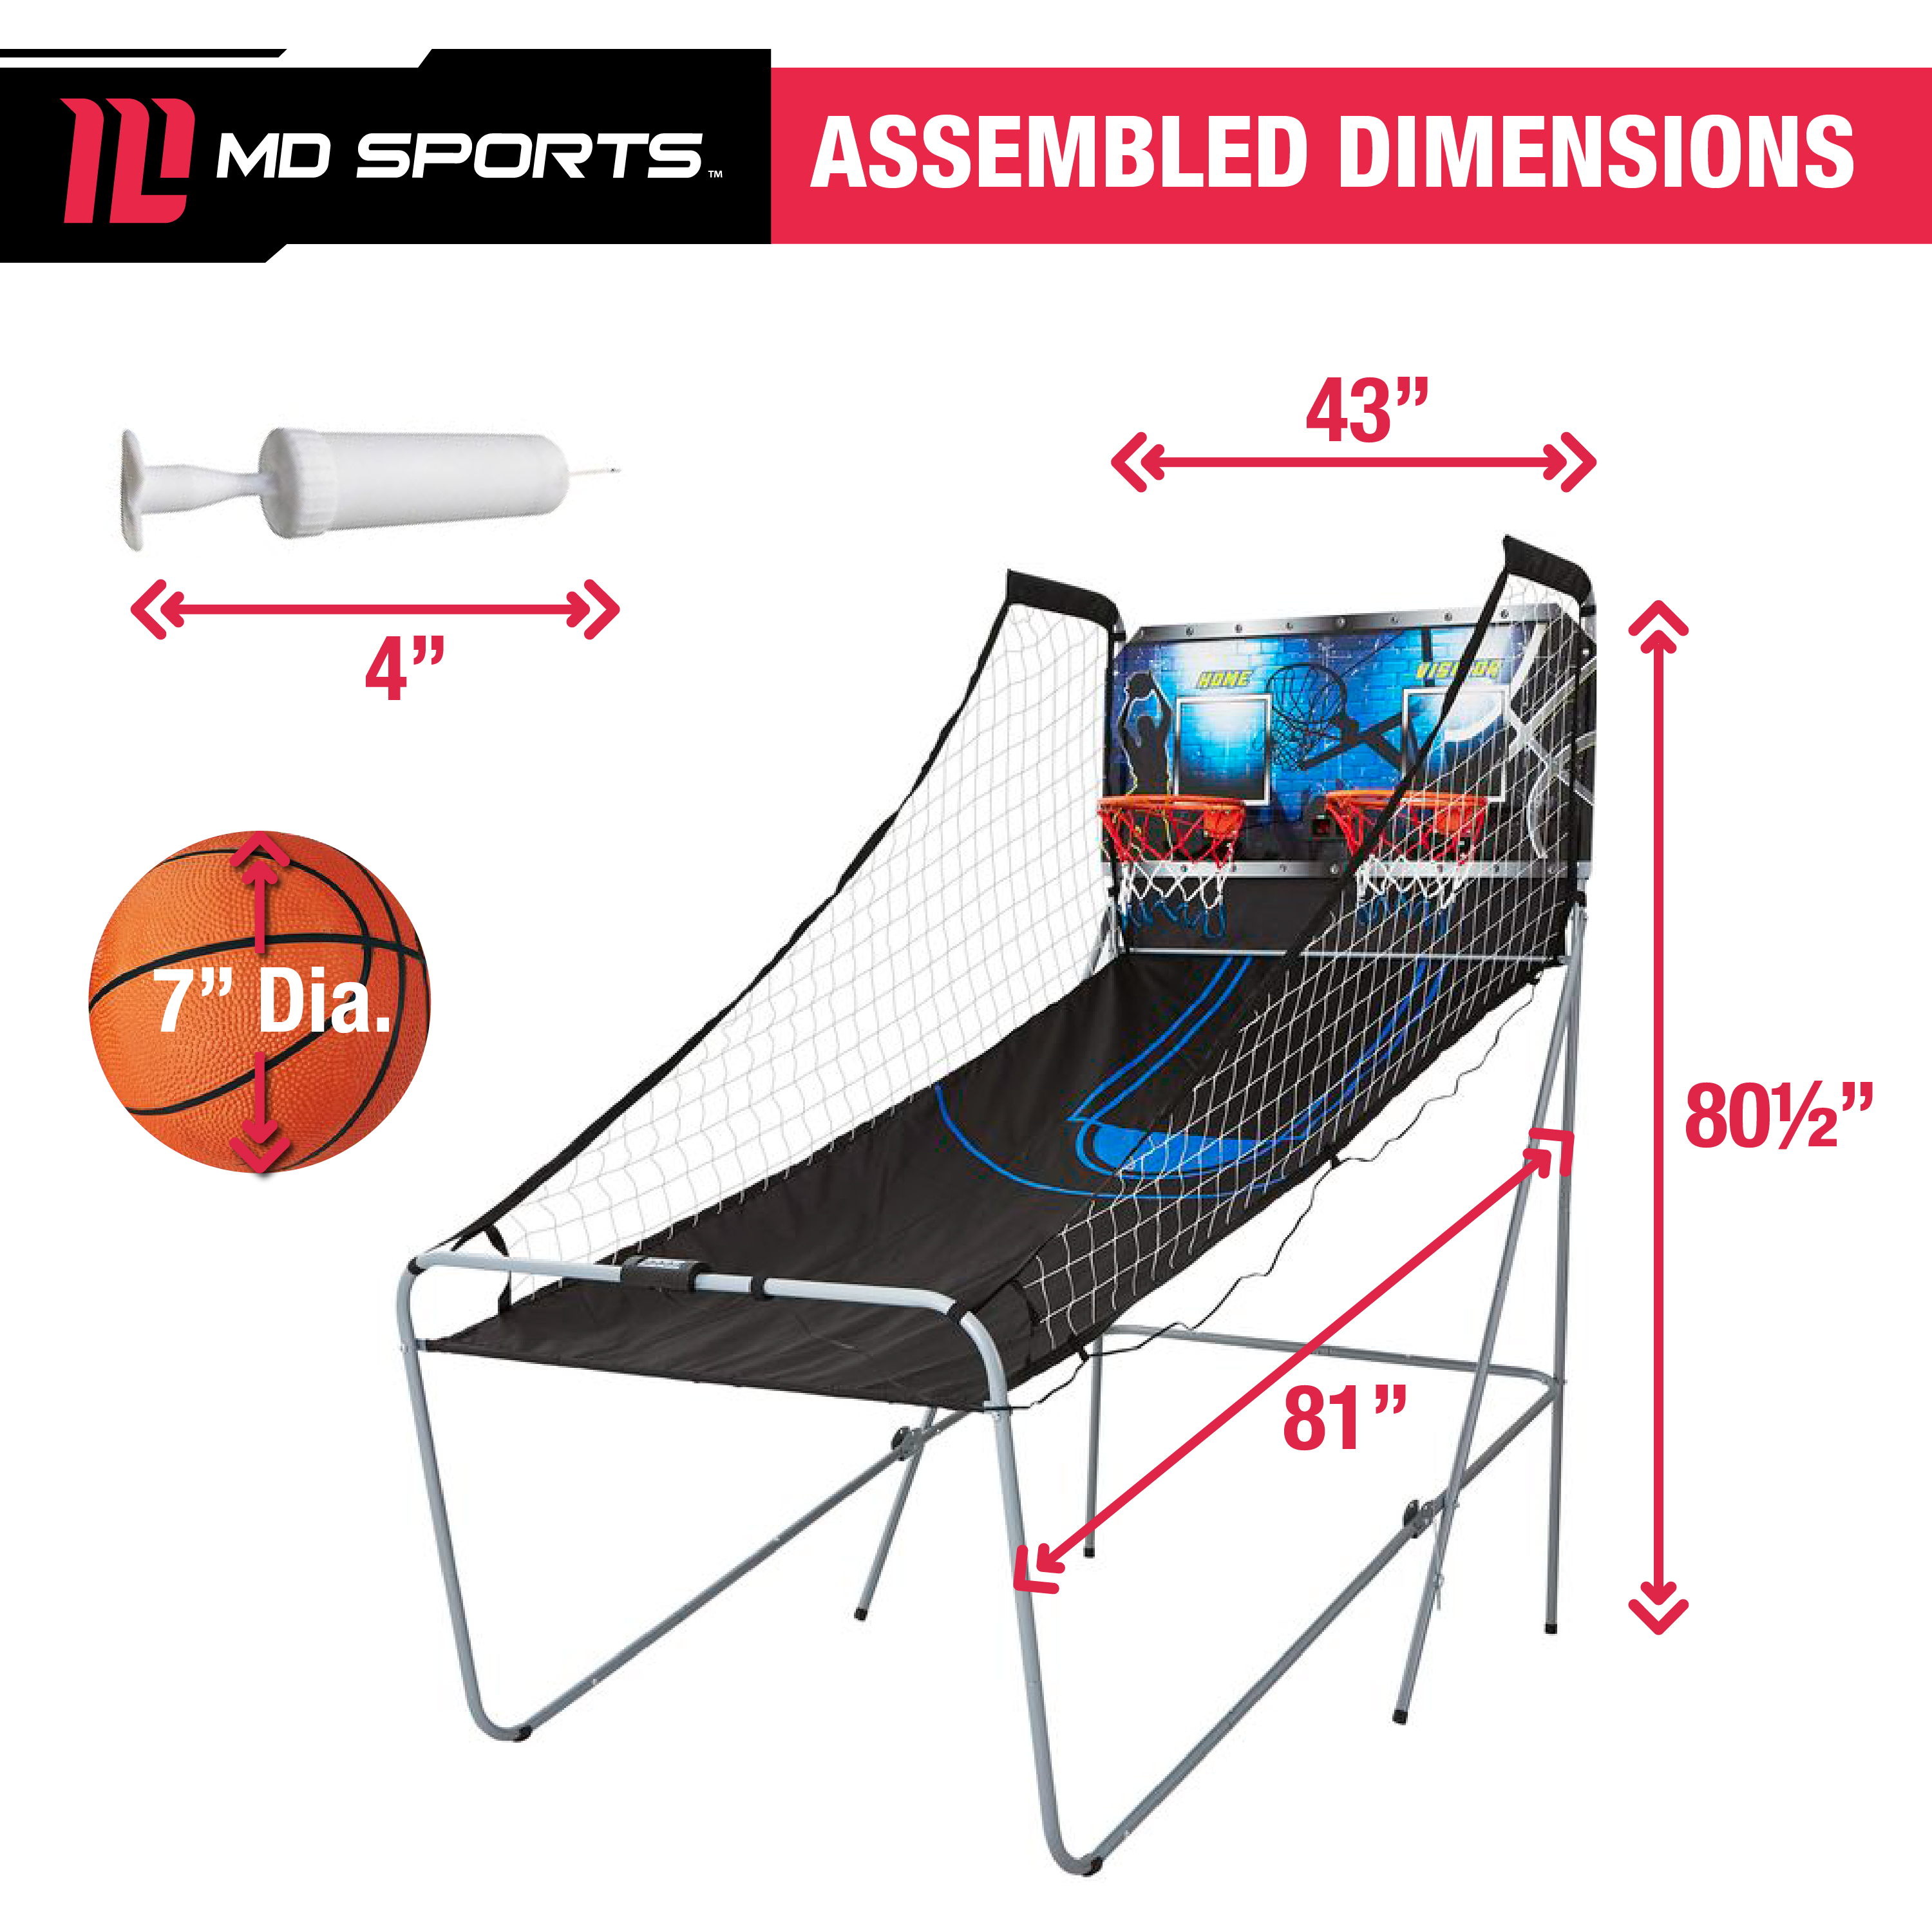 MD Sports Best Shot 2-Player 81 inch Foldable Arcade Basketball Game - image 3 of 10